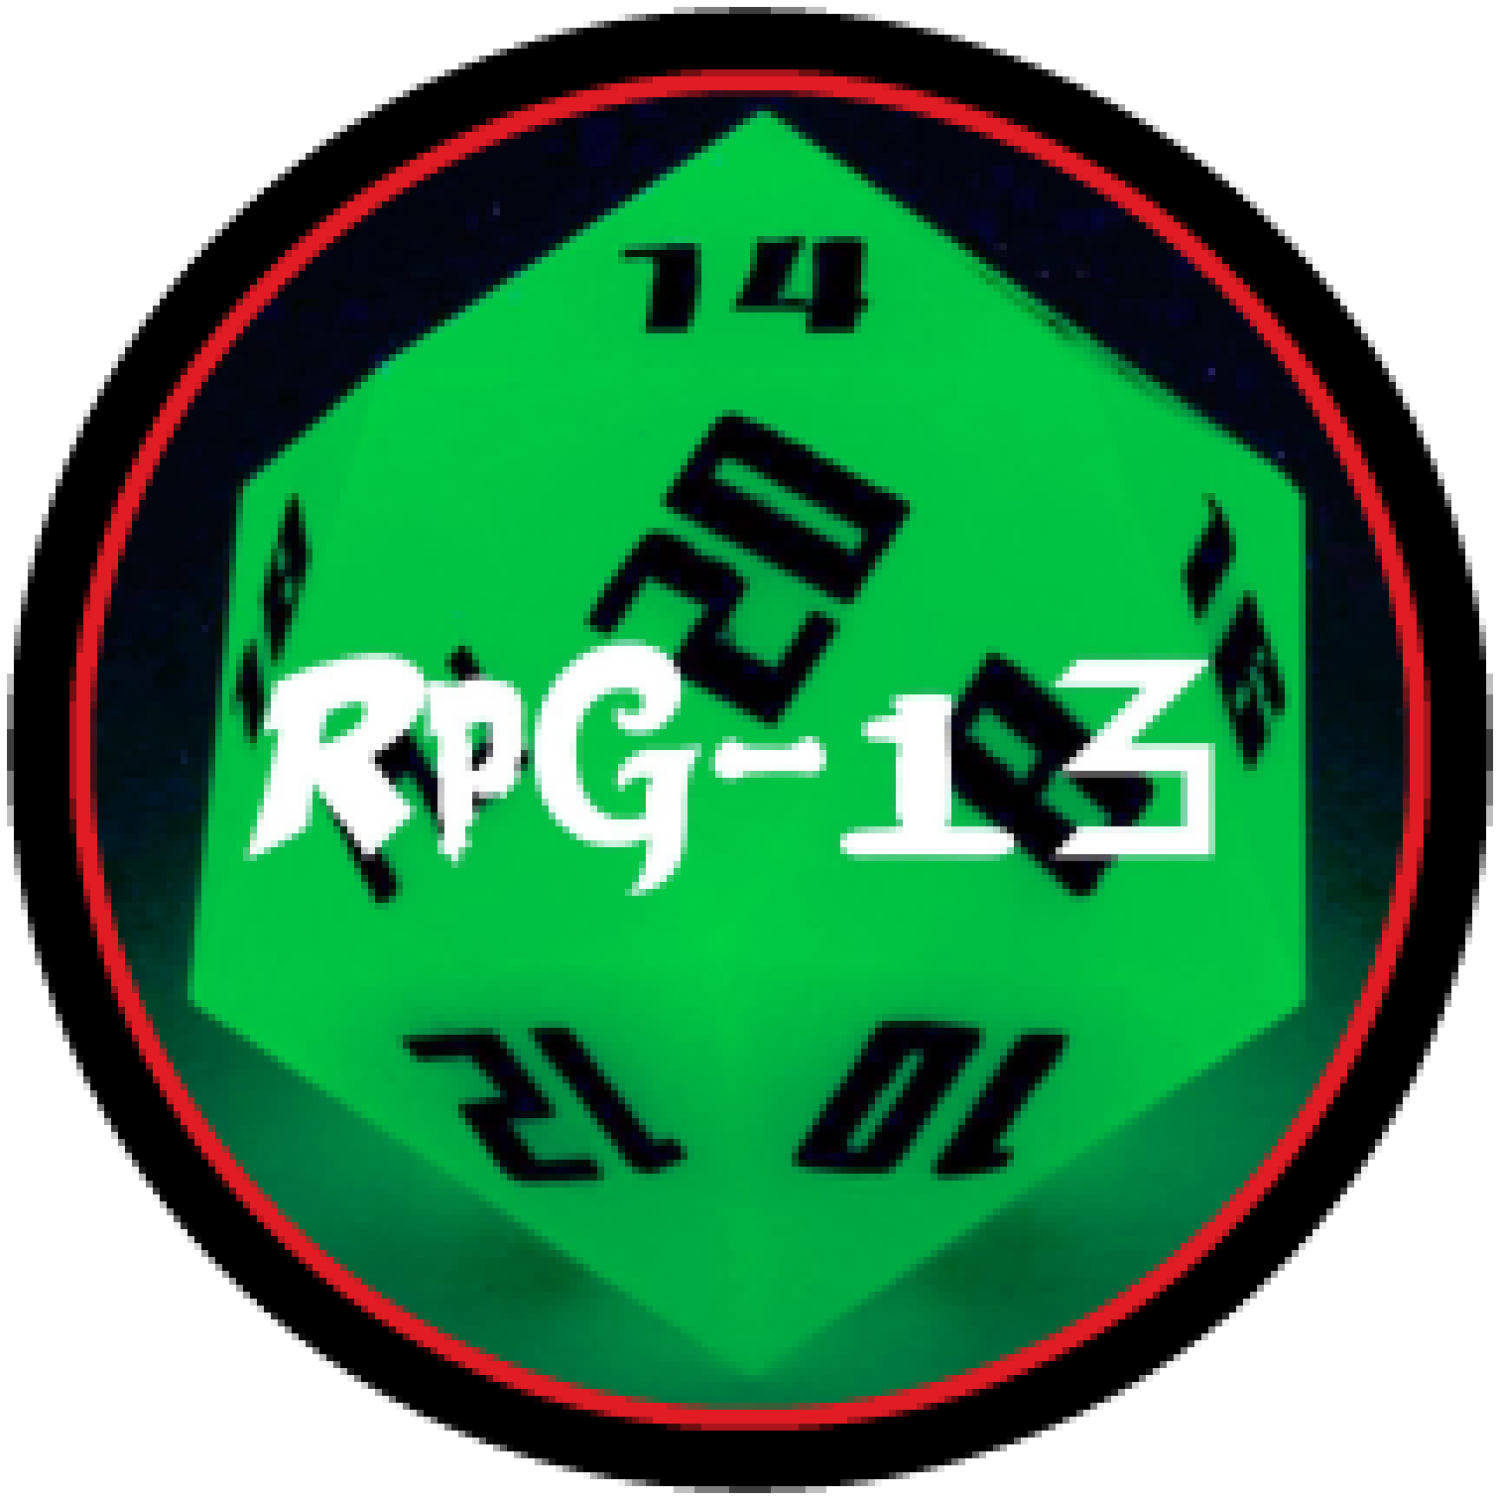 Green glowing 20 sided dice on black background. White text RPG-13